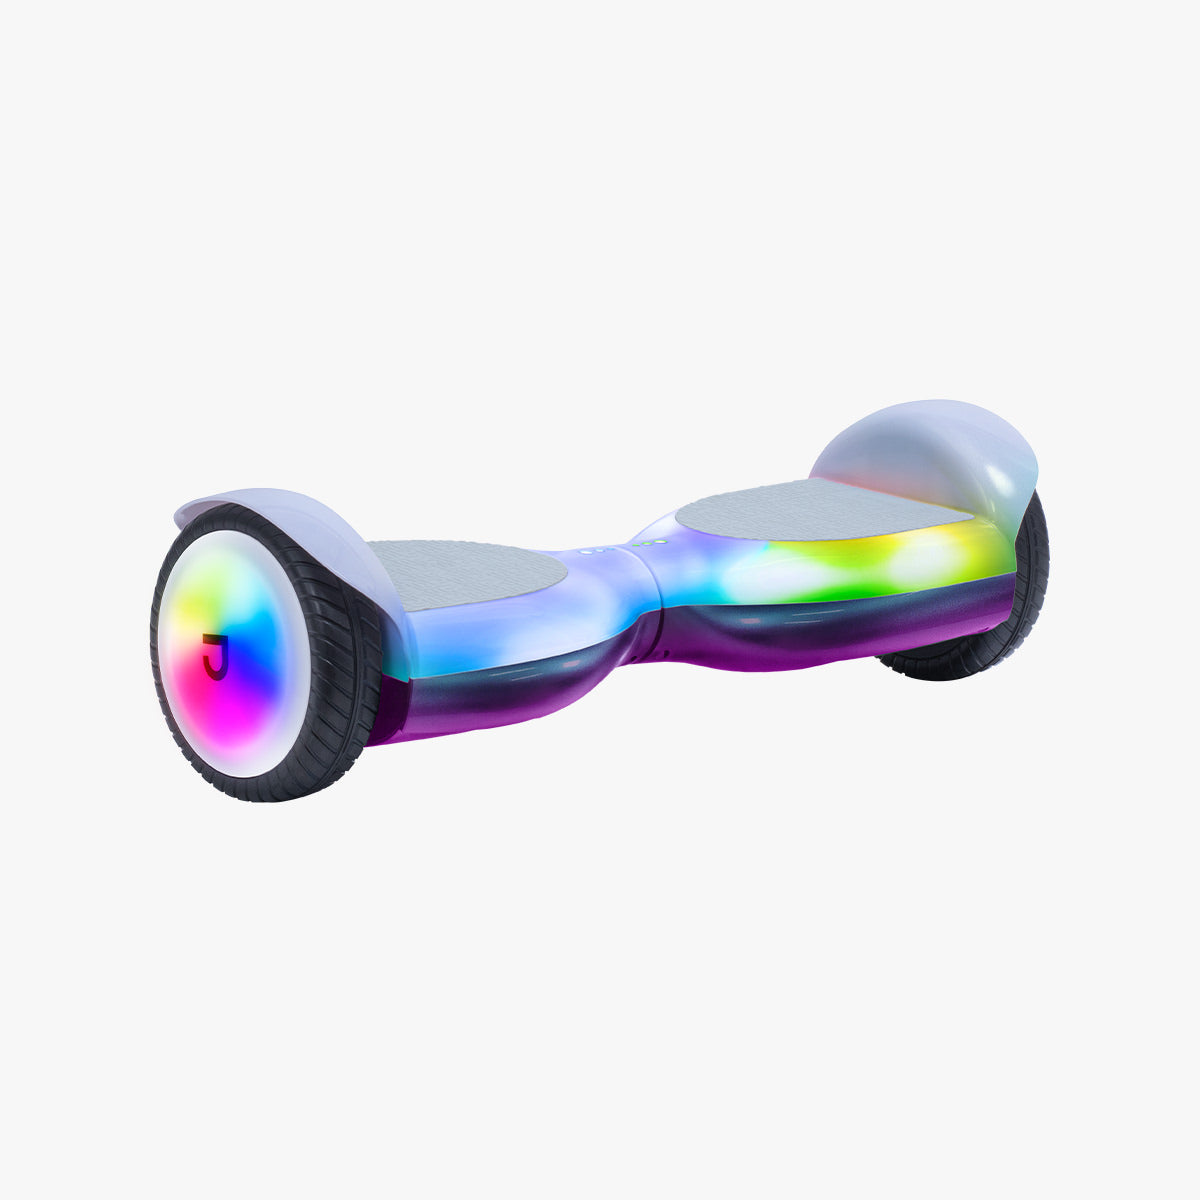 front view of the Plasma X hoverboard angled to the left